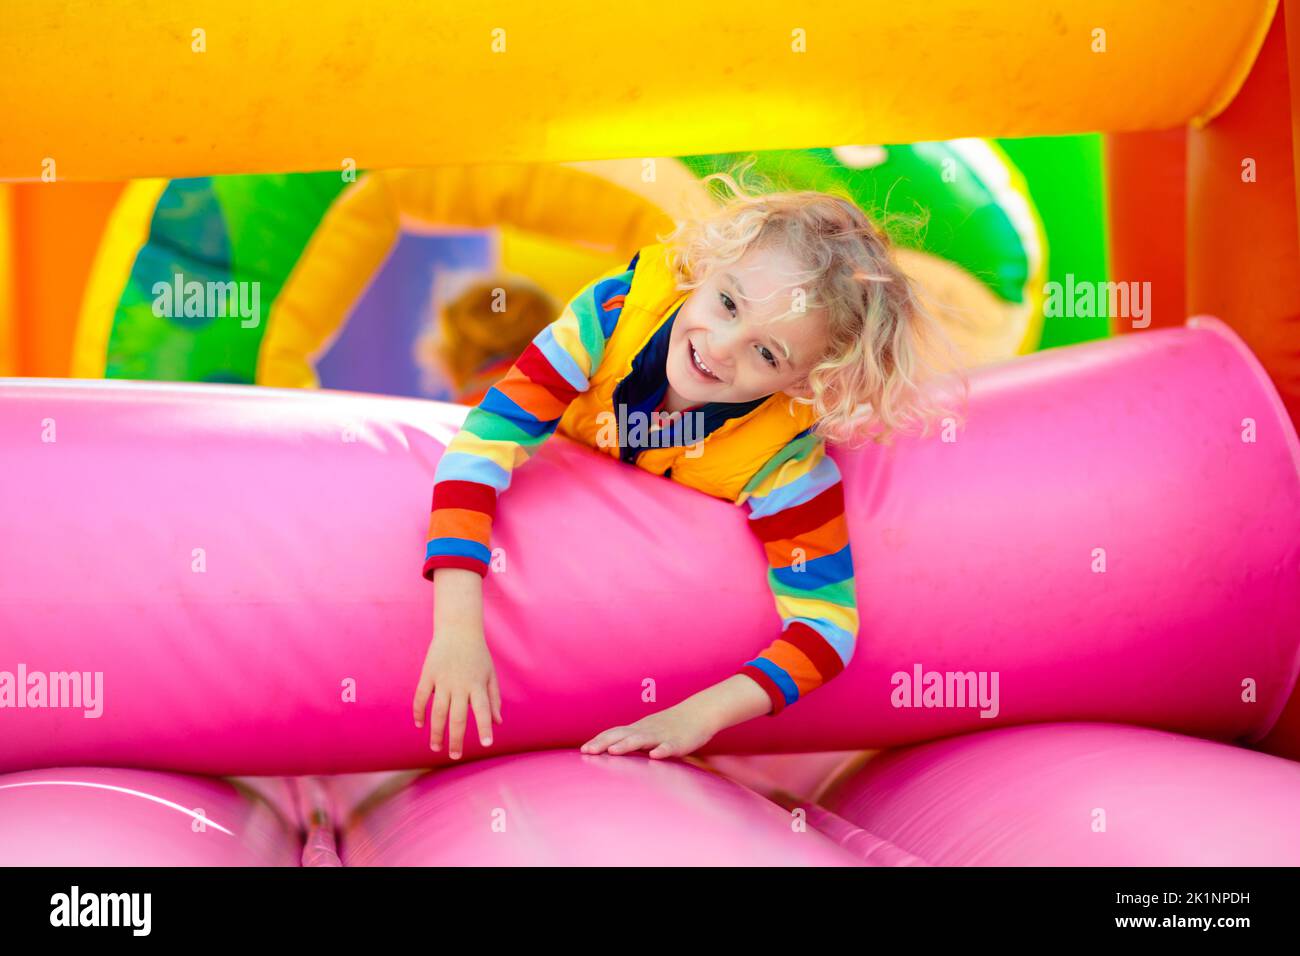 Child jumping on colorful playground trampoline. Kids jump in inflatable bounce castle on kindergarten birthday party Activity and play center for you Stock Photo